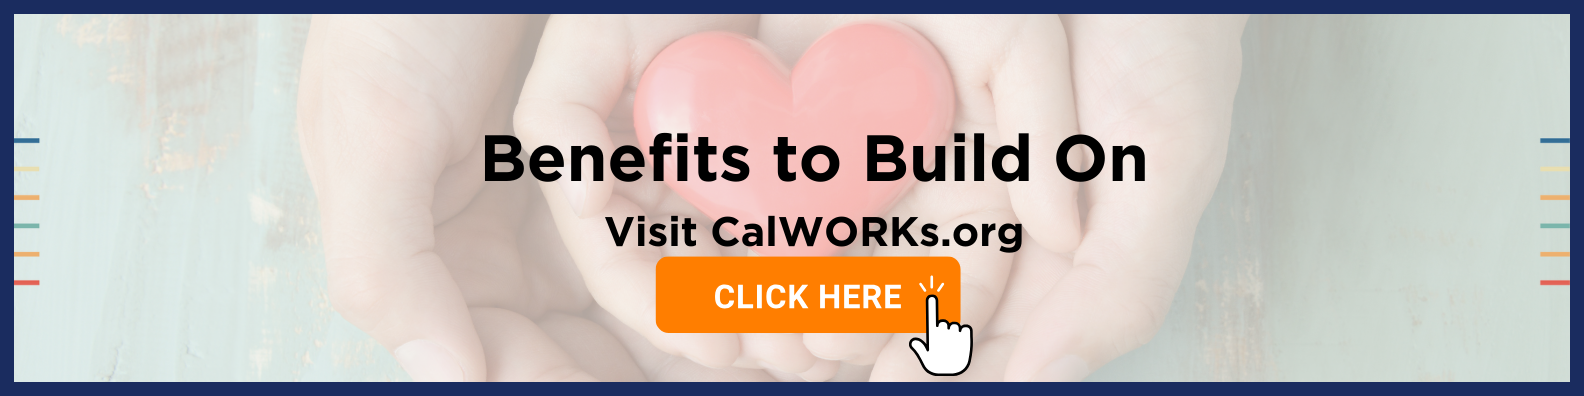 An image of adult hands holding a child's hands that is holding a red plastic heart, with wording about CalWORKs.org